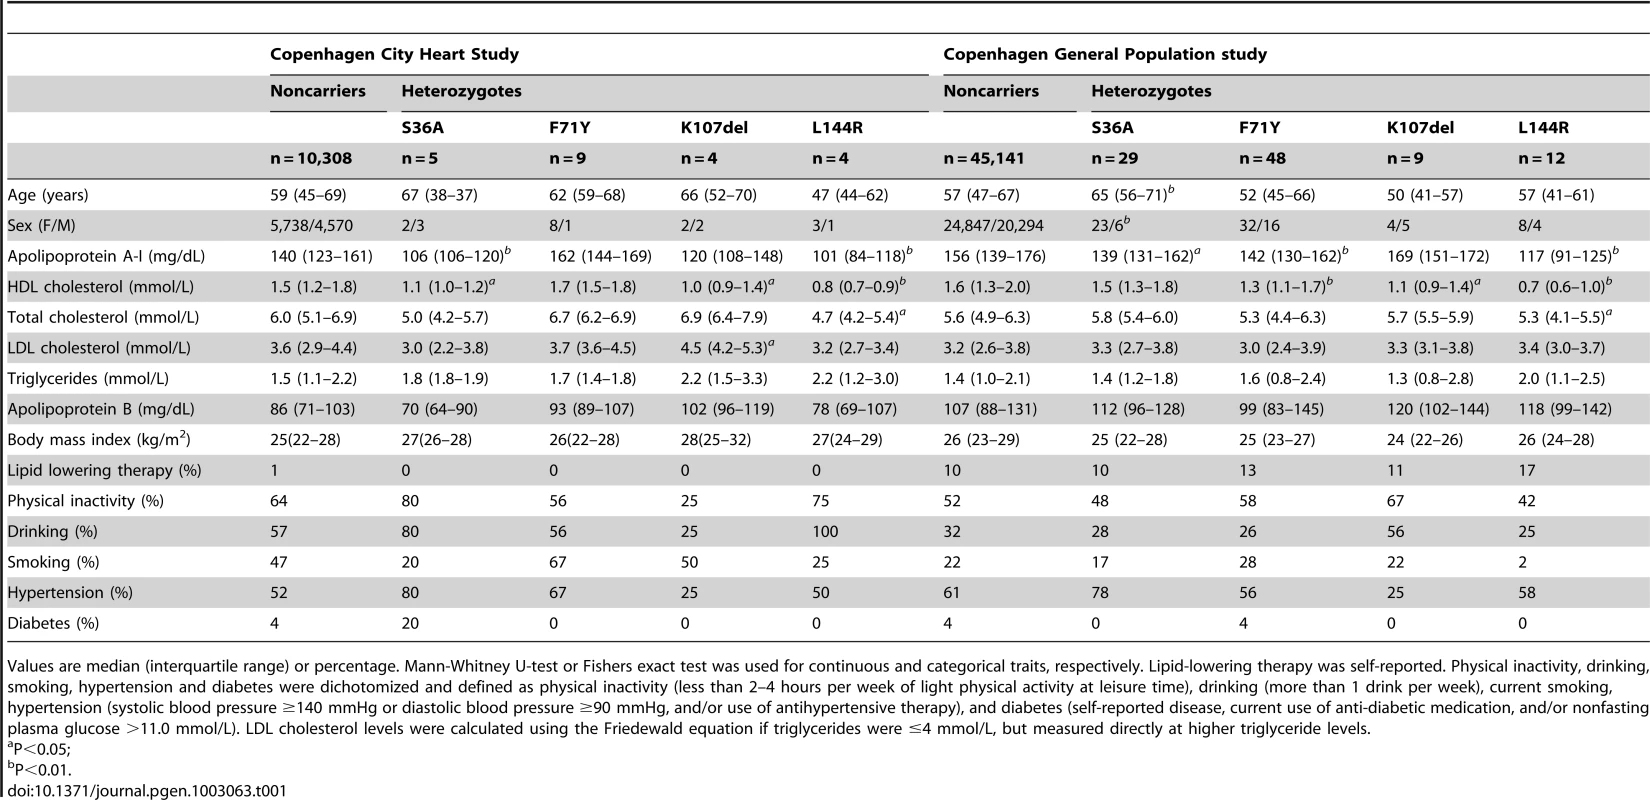 Characteristics of <i>APOA1</i> S36A, F71Y, K107del, and L144R heterozygotes and noncarriers in the Copenhagen City Heart Study (n = 10,330) and the Copenhagen General Population study (n = 45,239).